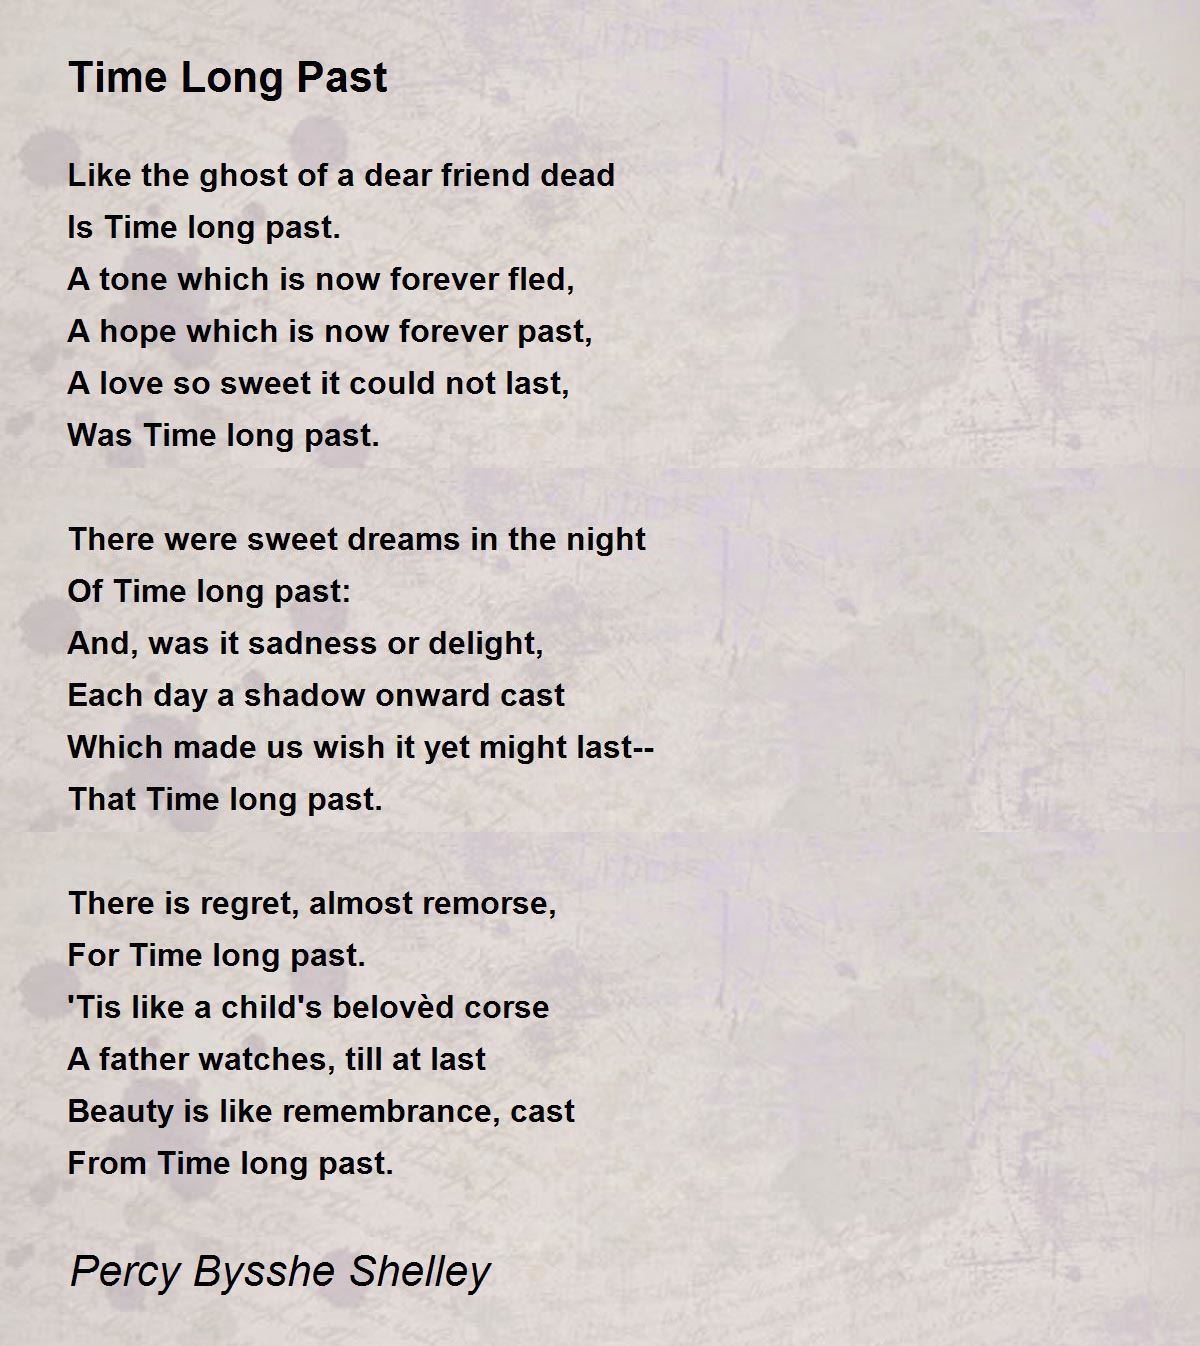 Time Long Past Poem by Percy Bysshe Shelley - Poem Hunter